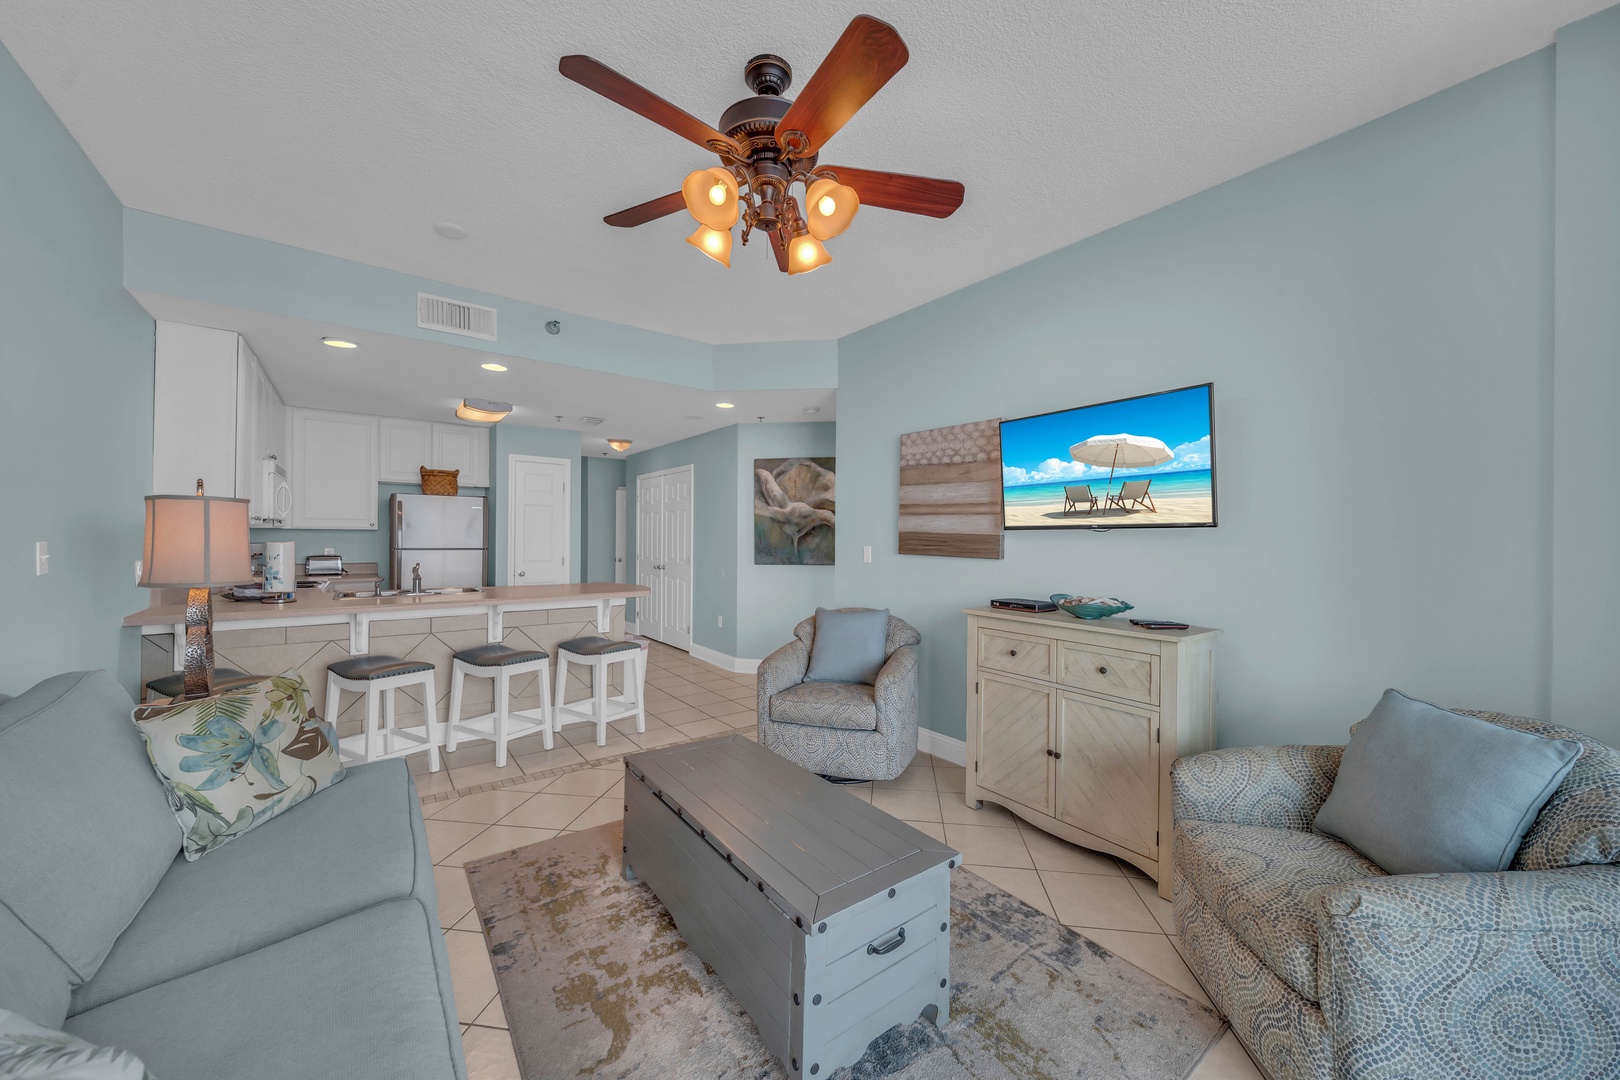 The Living Room, decorated in a Stylish Coastal Flair, welcomes you with a comfortable Queen Sleeper Sofa, an HD Flat Screen TV, and a Stereo.